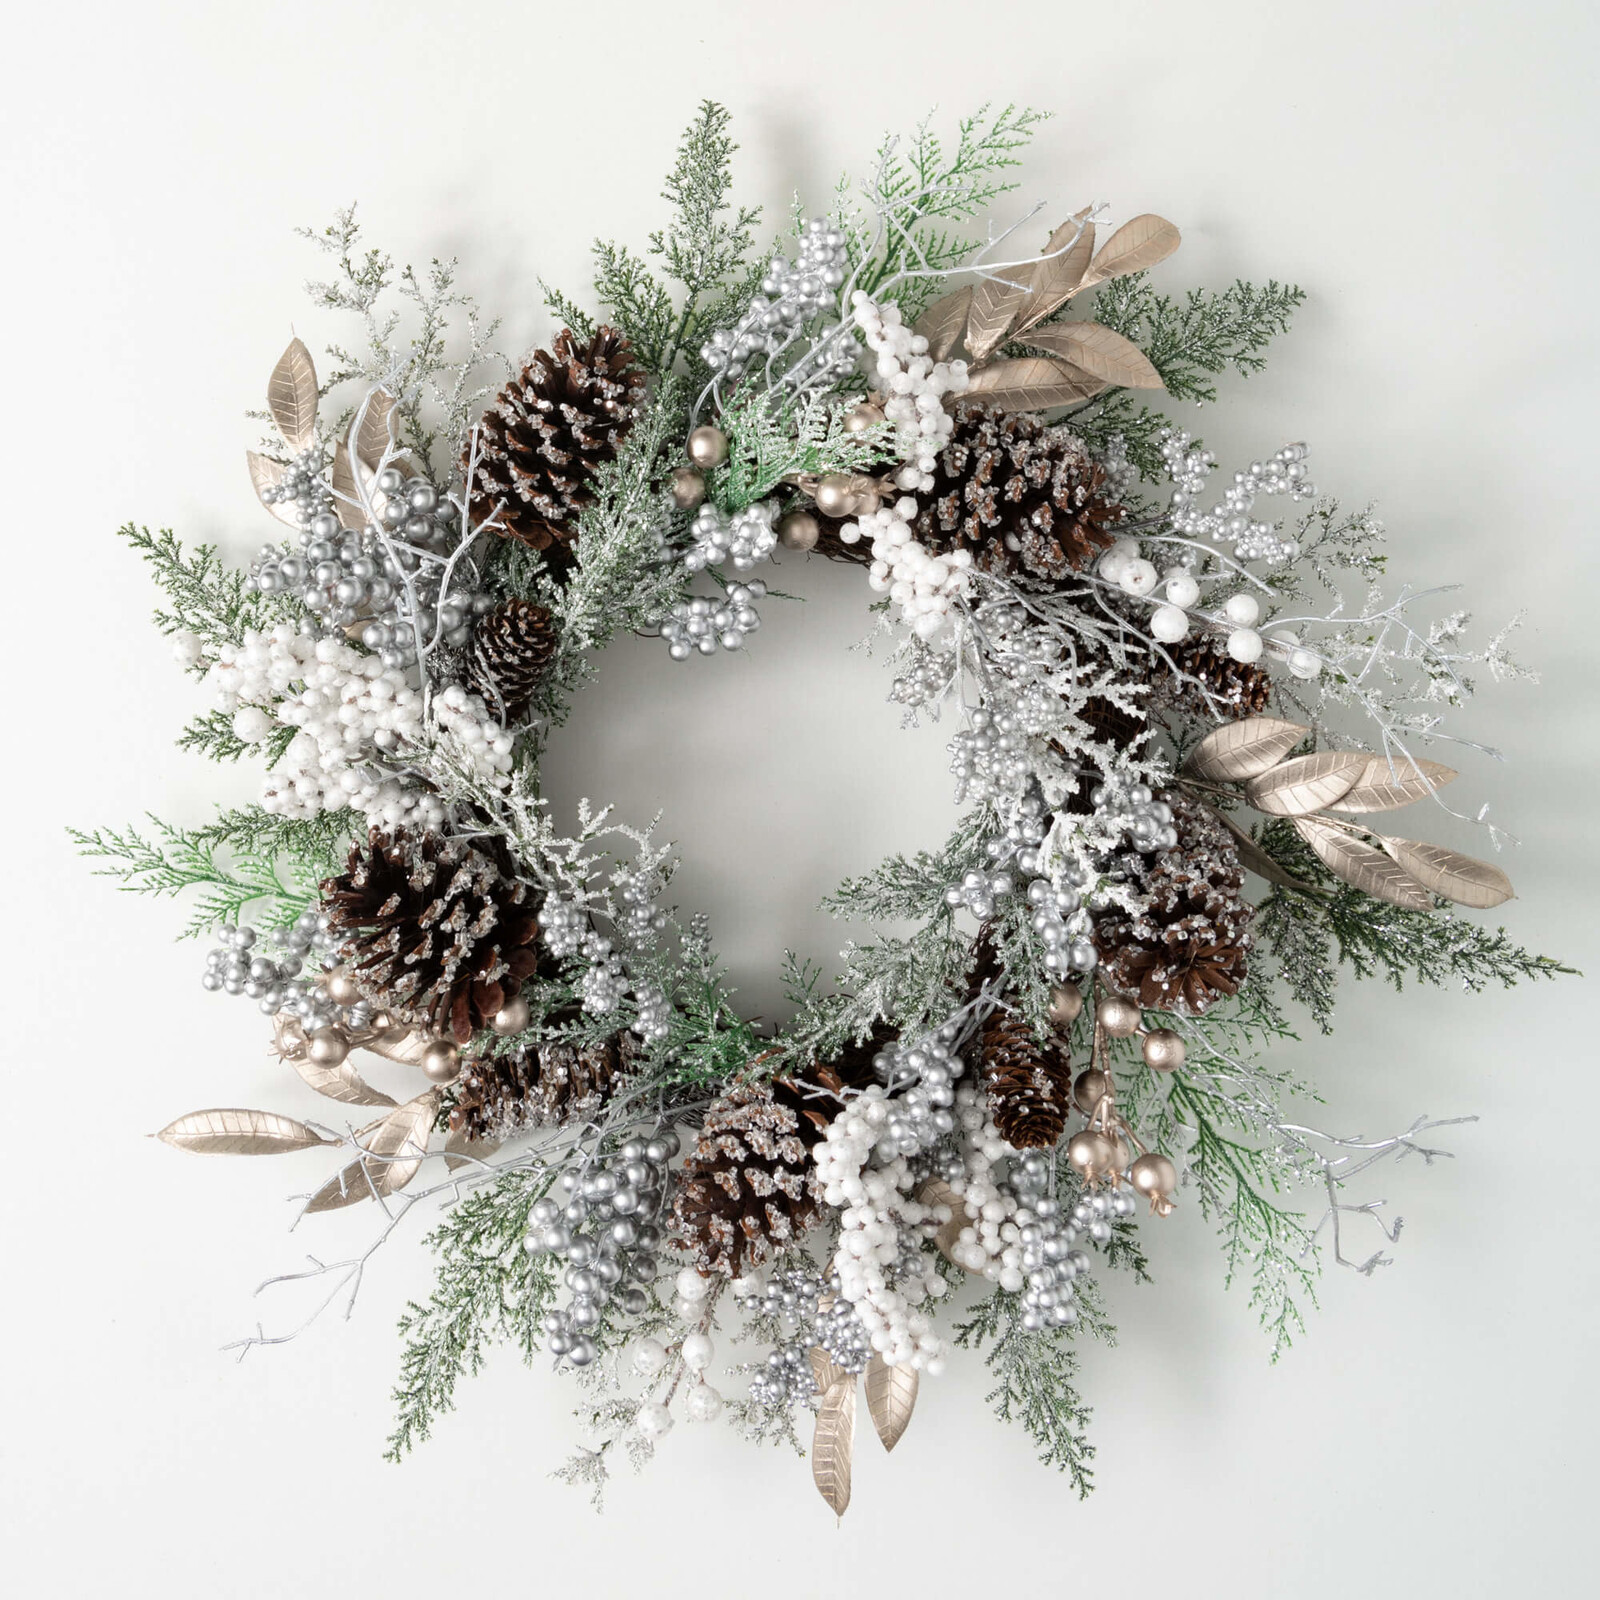 Sullivans 24" FROSTED BERRY WREATH  WR948 loading=